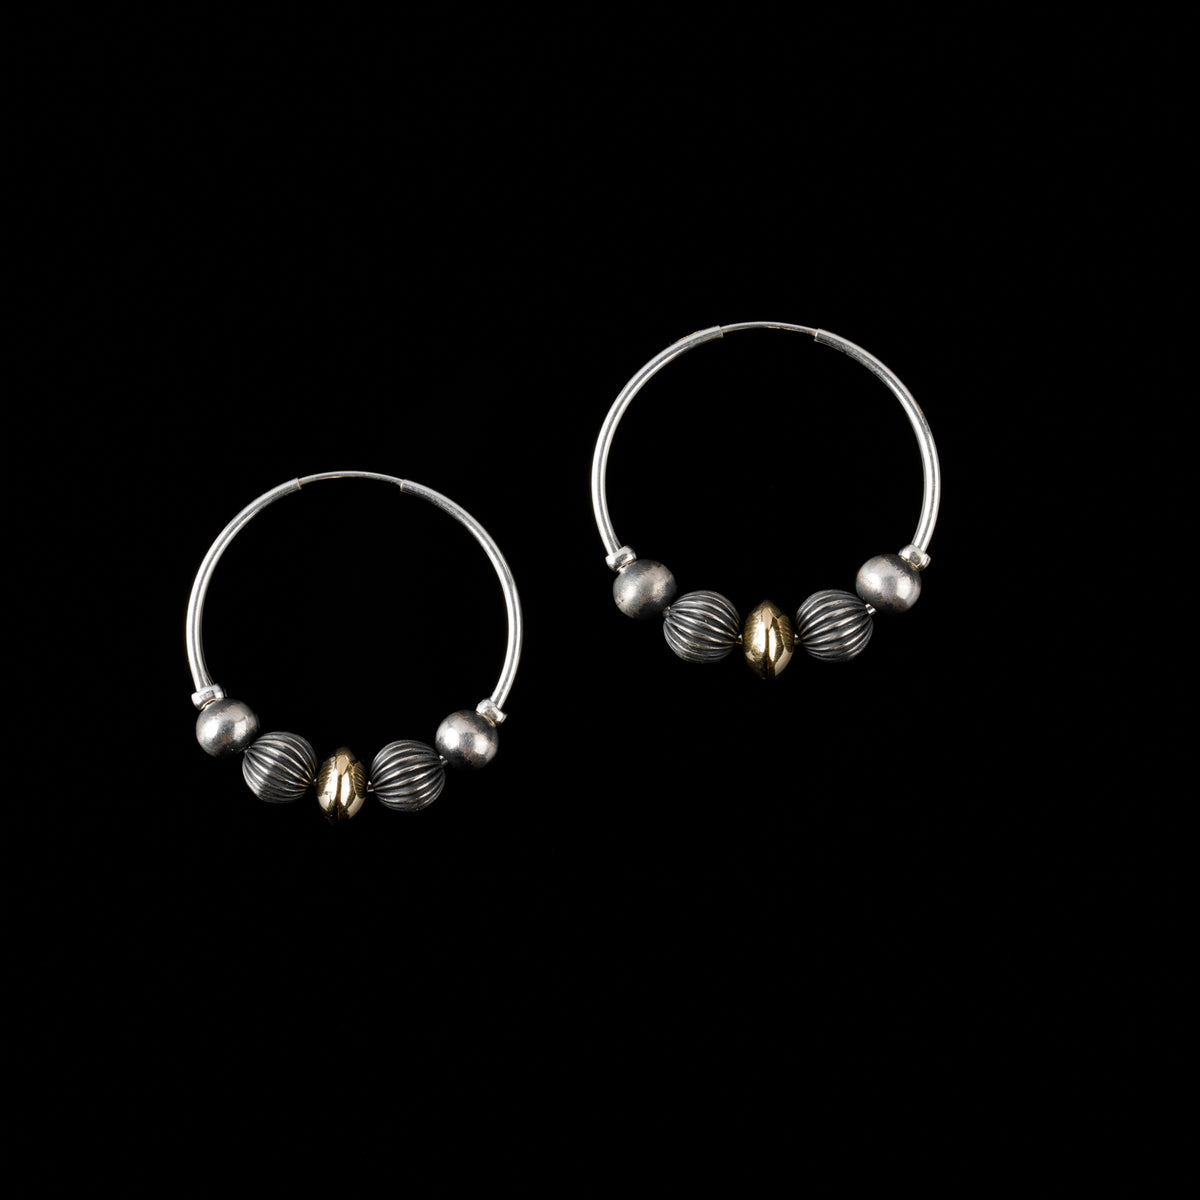 Sterling Silver Hoops with Sterling Silver Santa Fe Pearls, 14k Gold Rondel, and Corrugated Beads - 1 1/4"